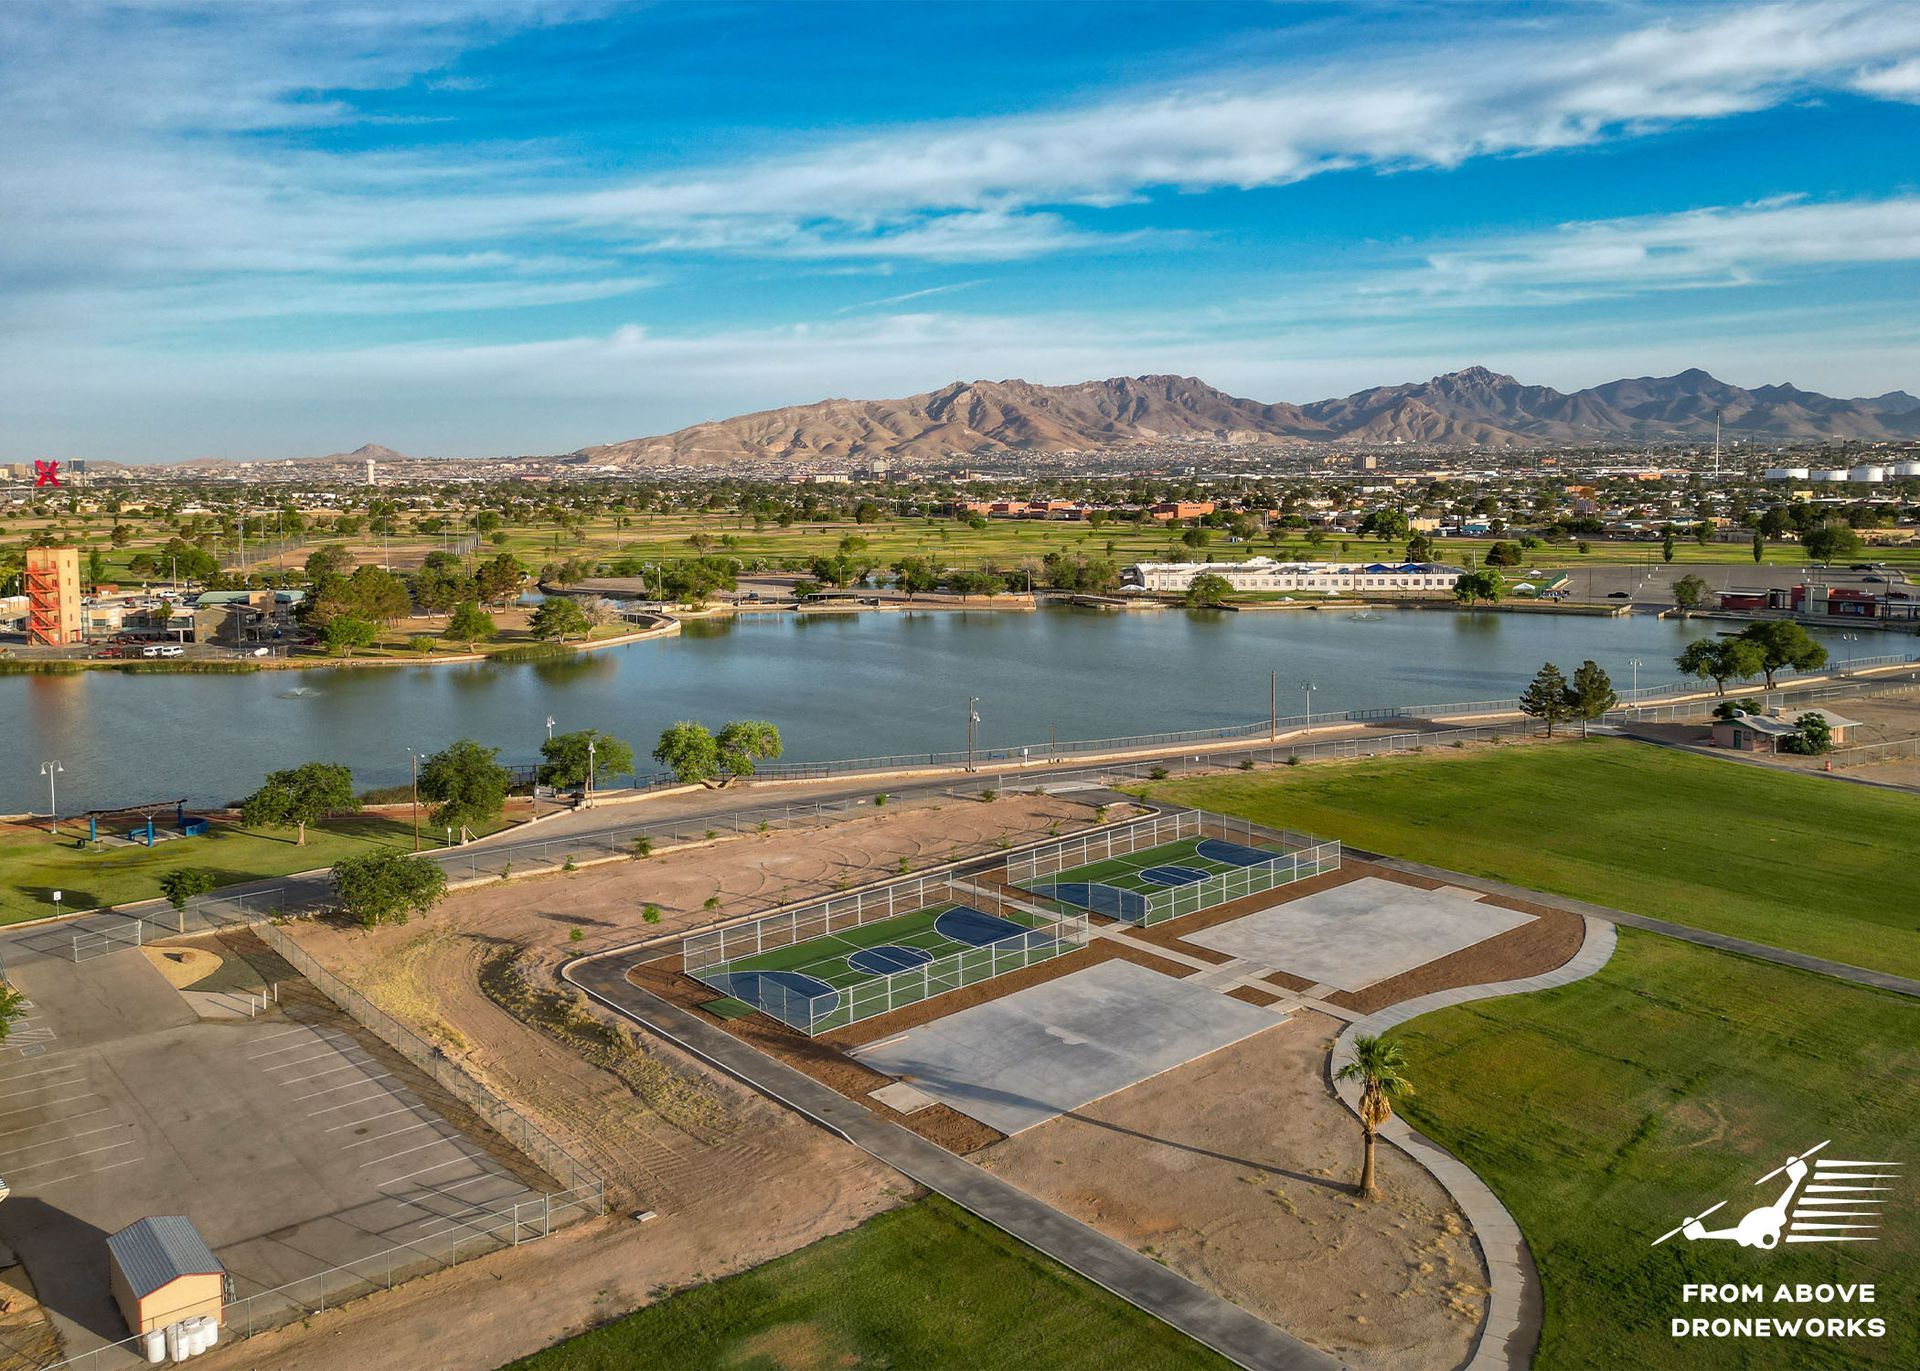 Ascarate Park, El Paso: An image showcasing Ascarate Park in El Paso. The photo may feature the park's landscape, including greenery, lake, walking trails, recreational facilities, or visitors enjoying various activities. It highlights the natural beauty, amenities, and leisure opportunities offered by Ascarate Park in El Paso.